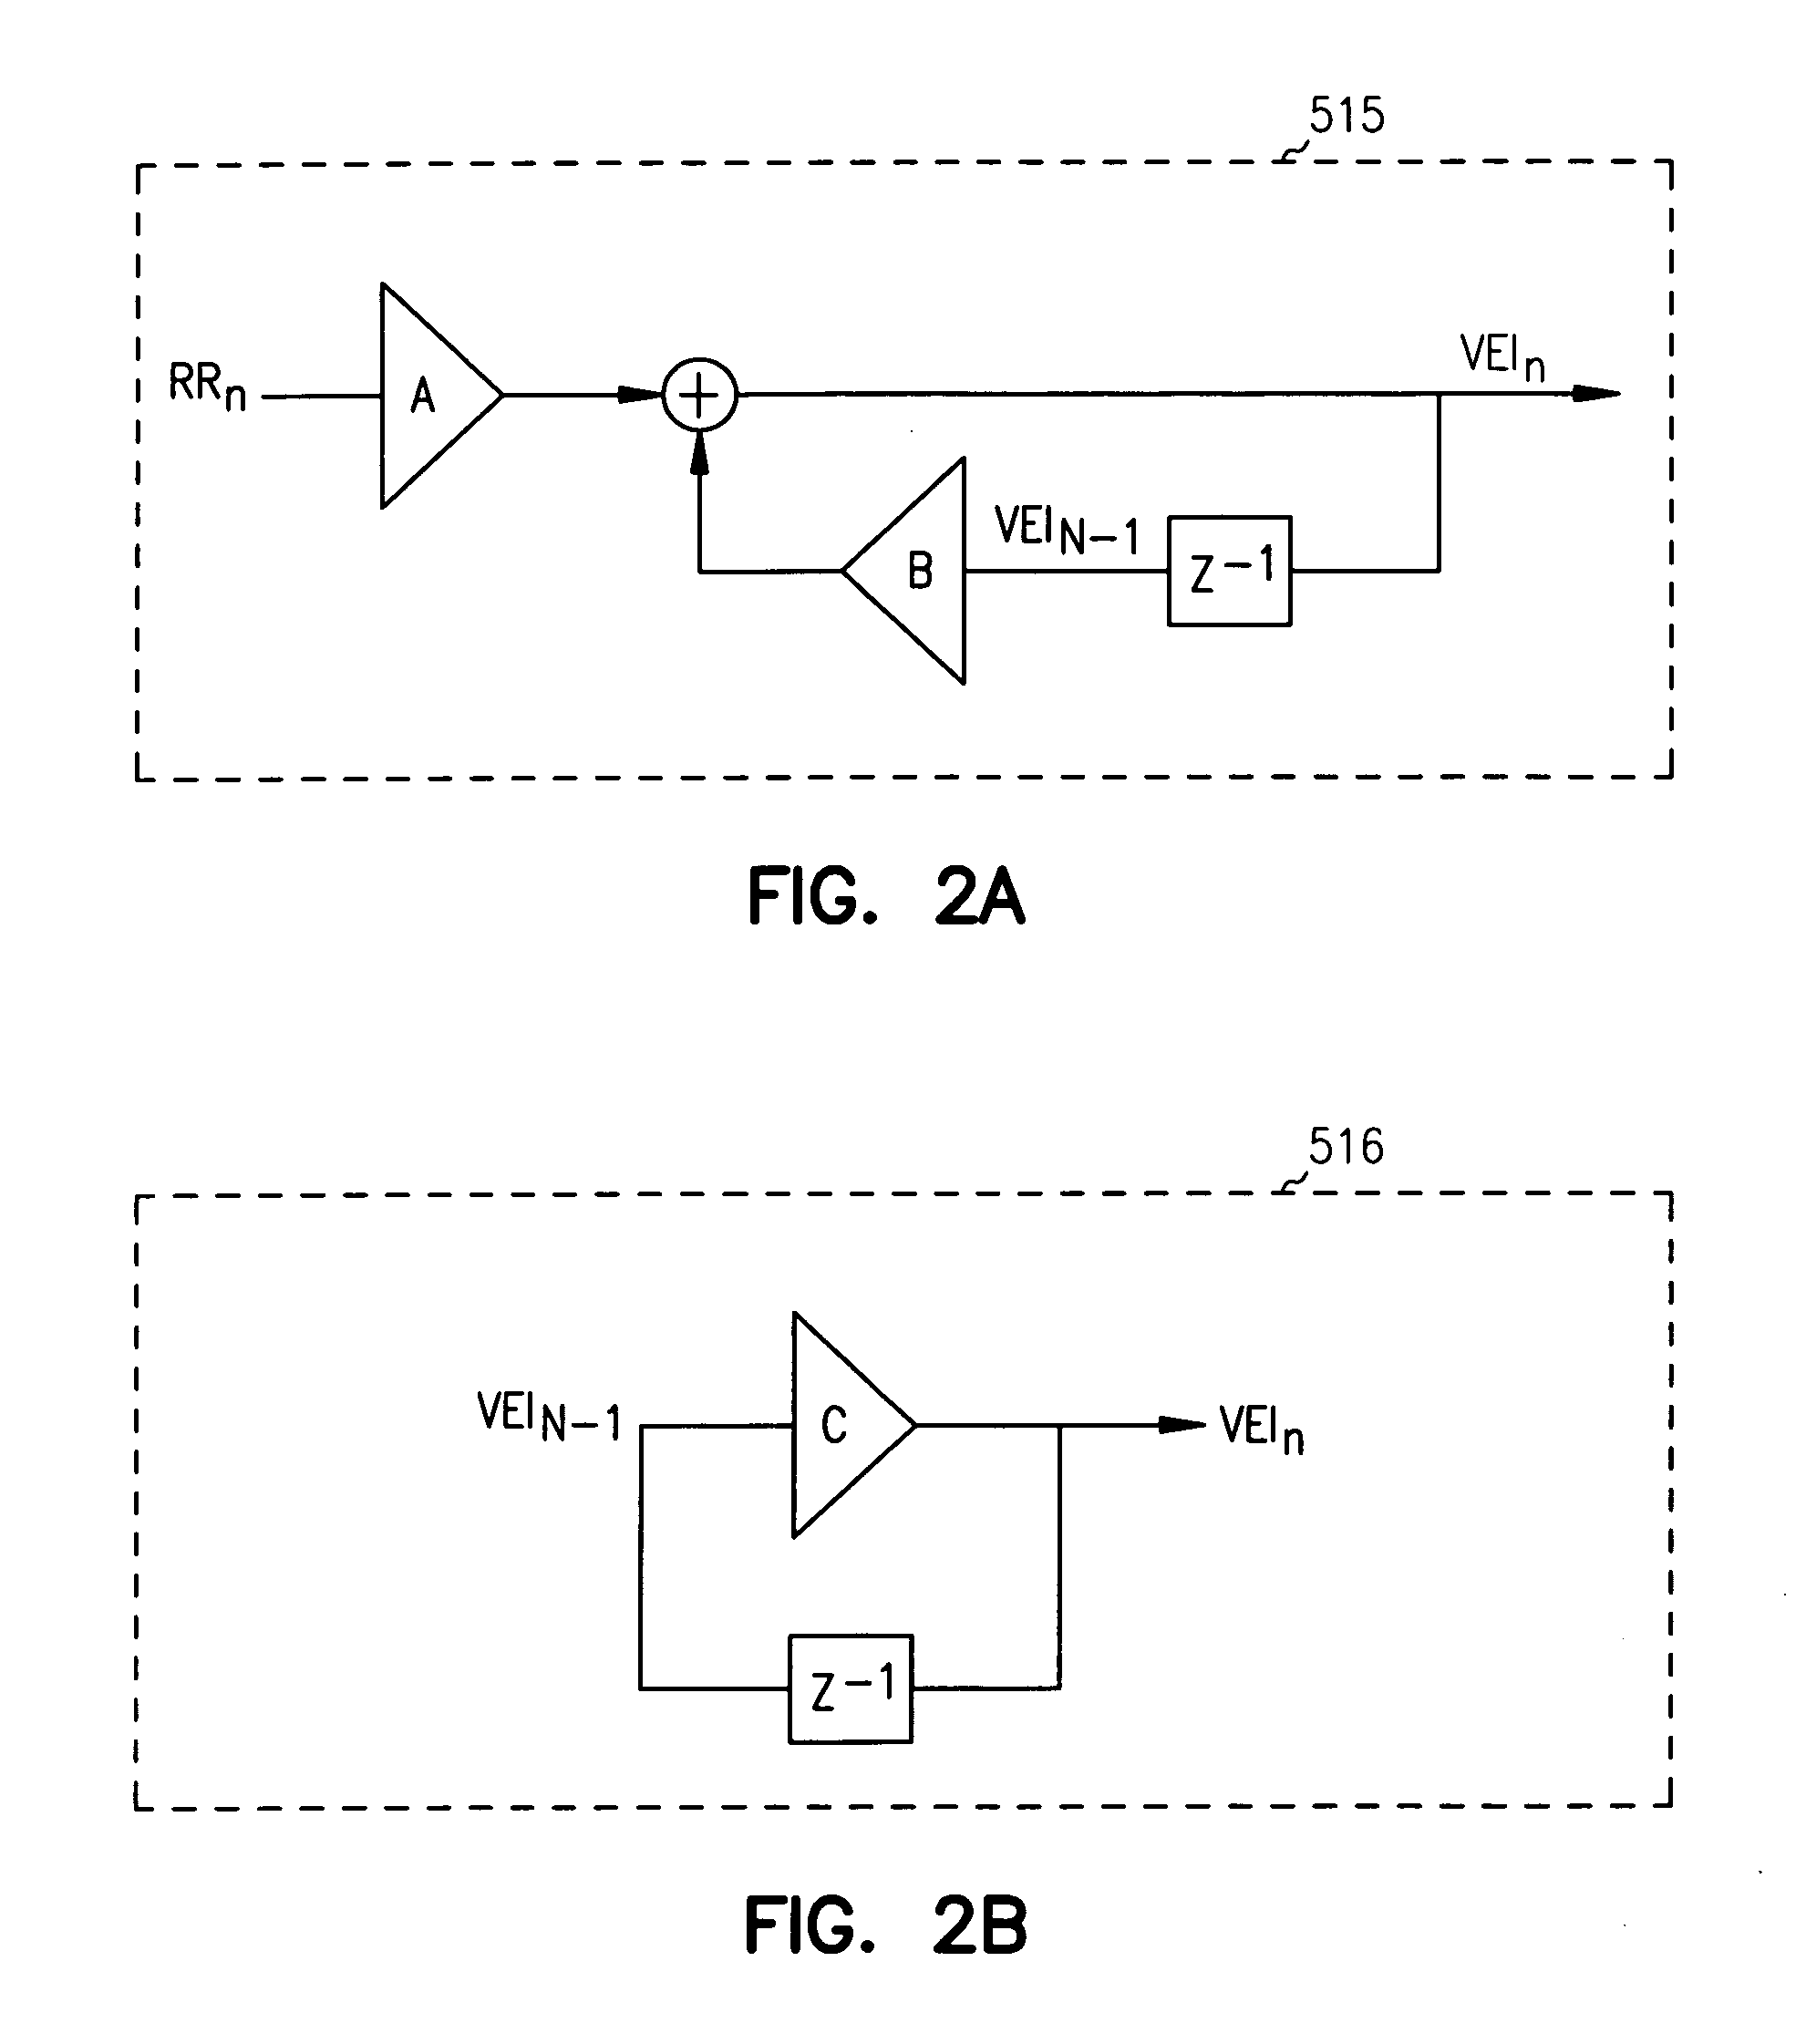 Apparatus and method for pacing mode switching during atrial tachyarrhythmias